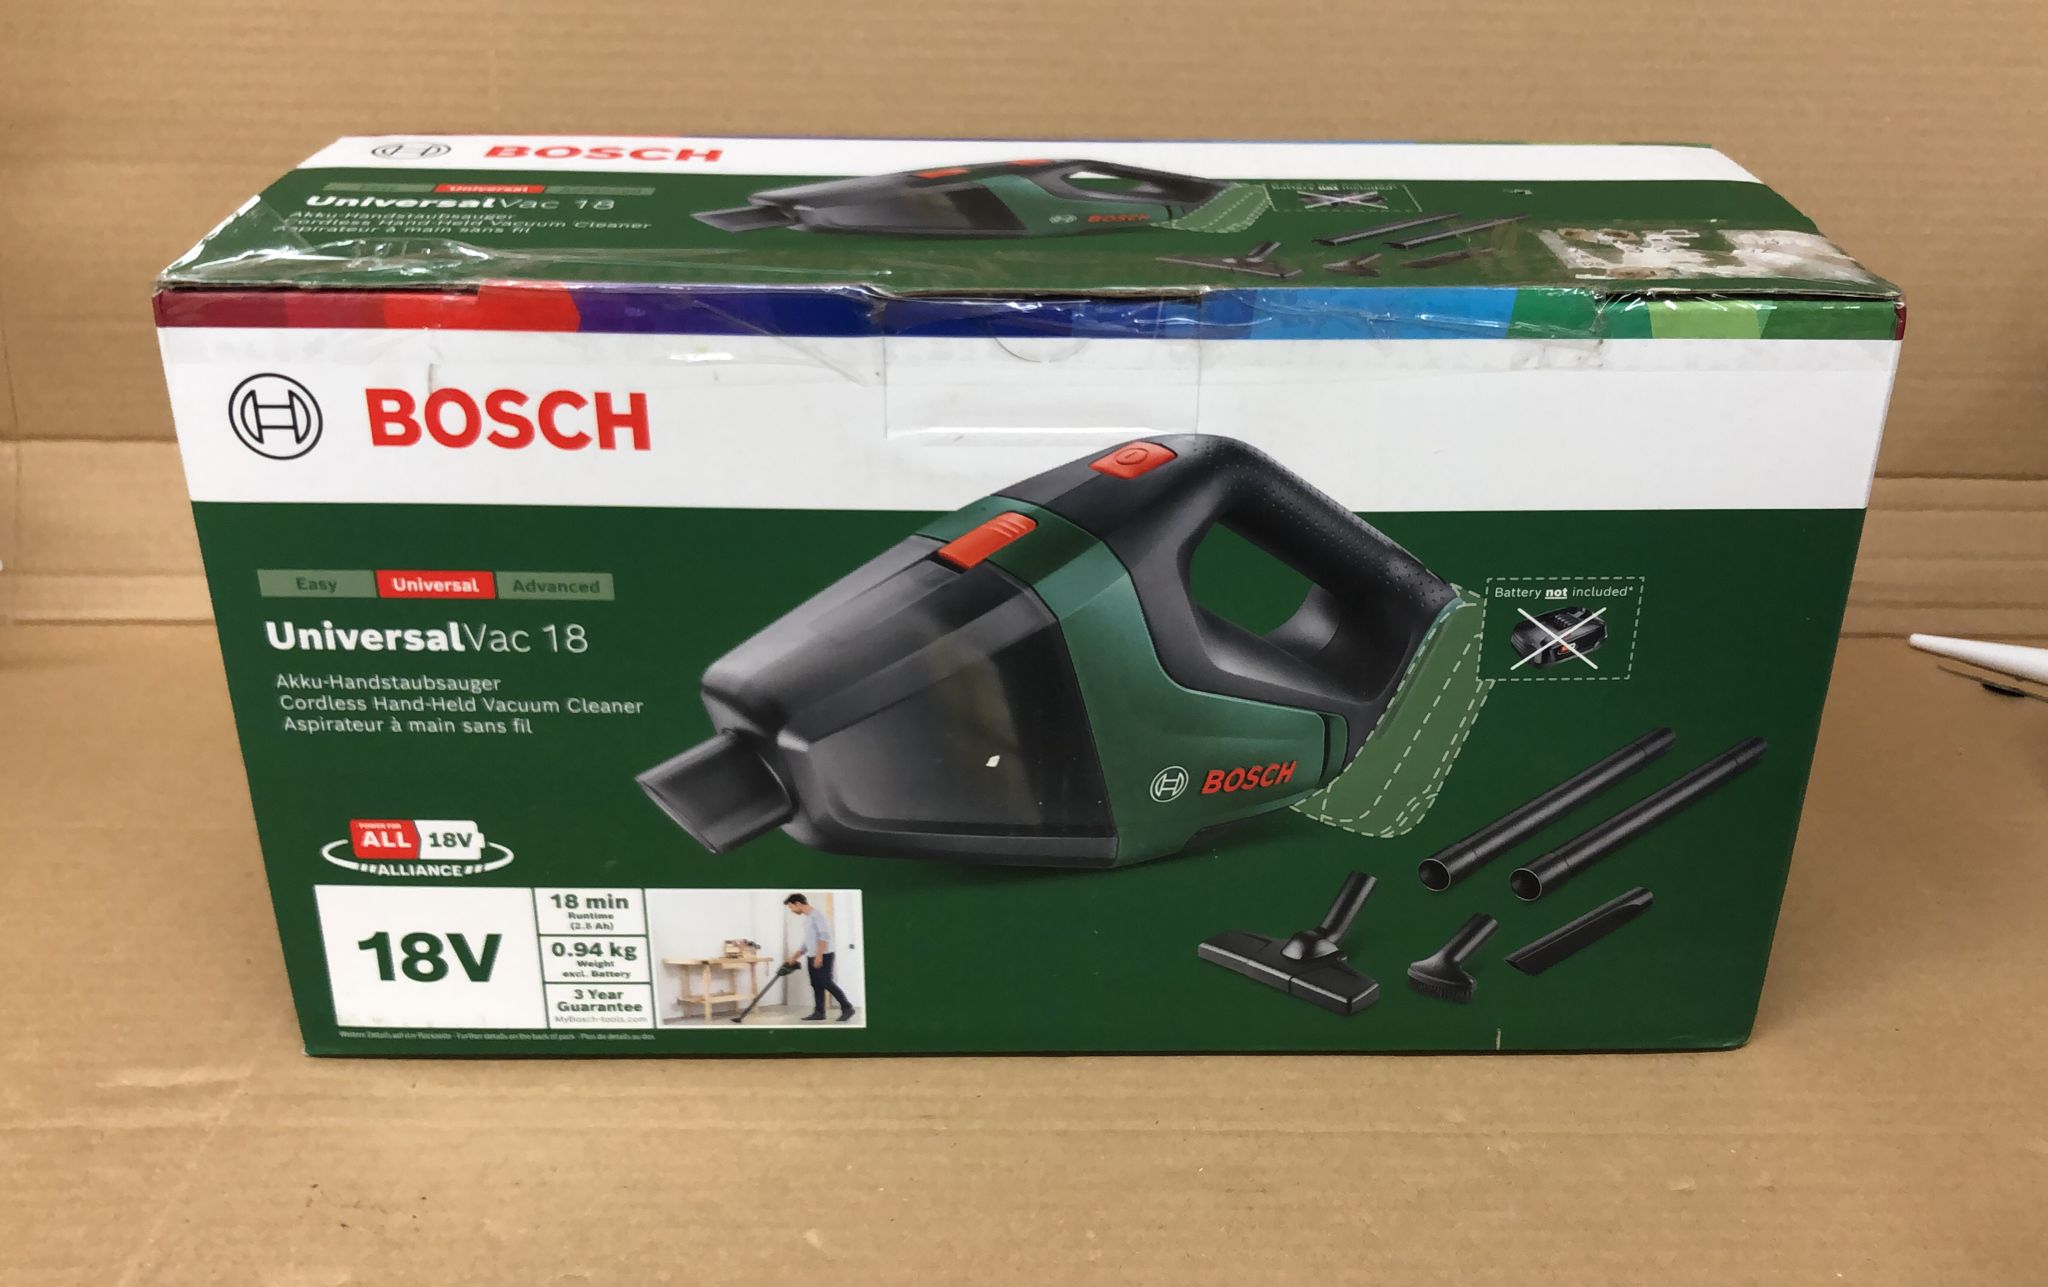 Bosch Home and Garden Cordless Vacuum Cleaner UniversalVac 18 (without battery, 18 Volt system, in carton packaging) 6780